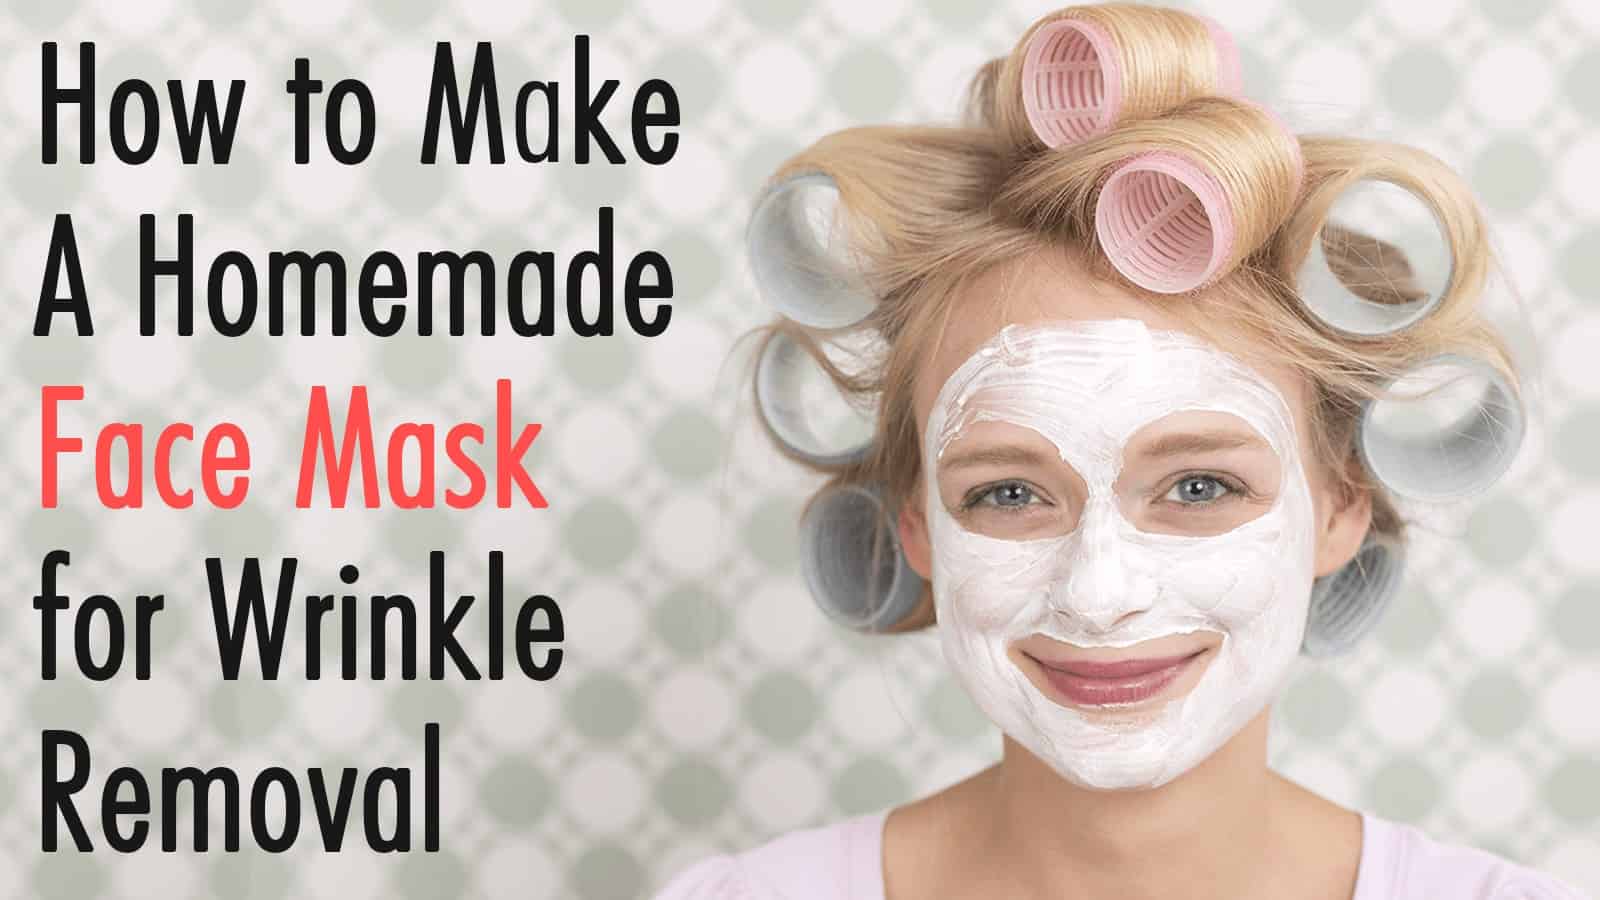 How to Make A Homemade Face Mask for Wrinkle Removal